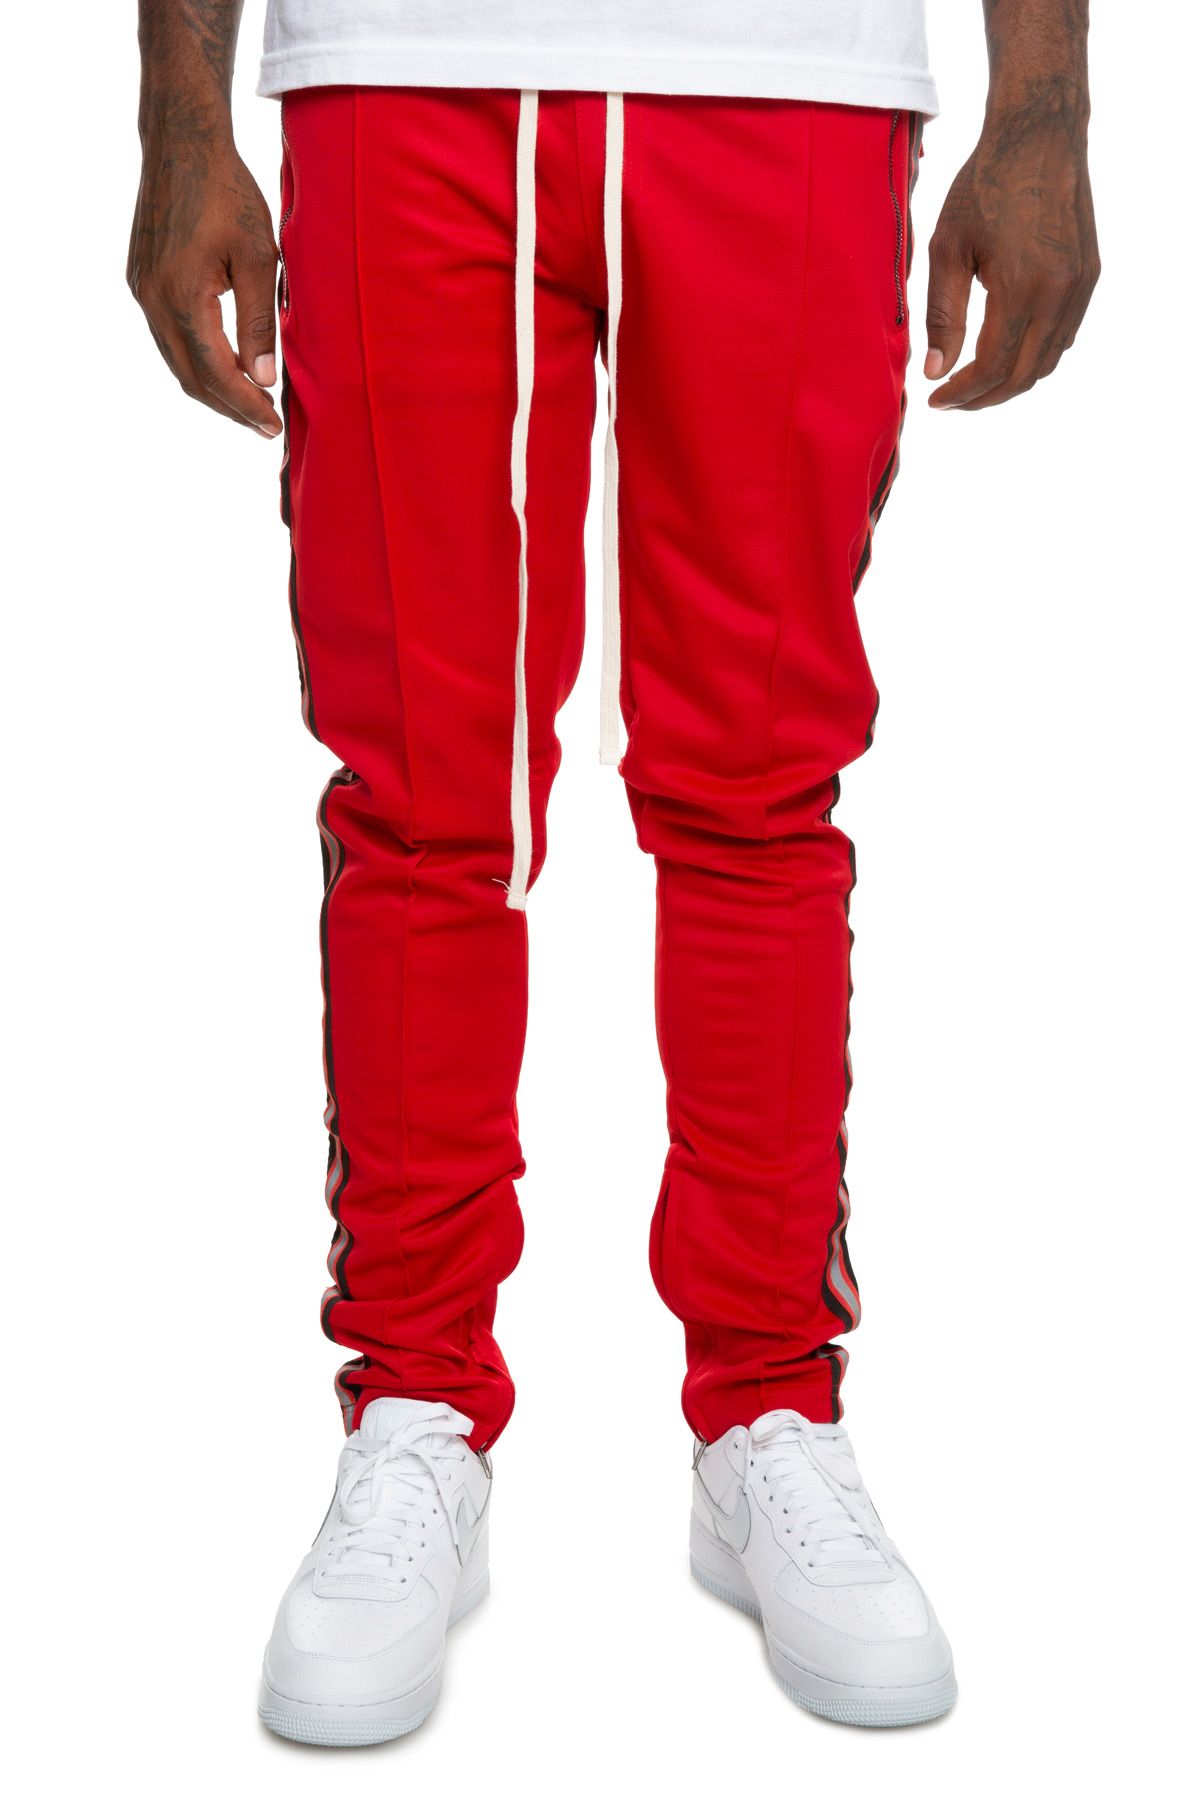 KDNK (ACE AND REVE) Reflective Tape Track Pants in SMA-KB3114-RED - Shiekh